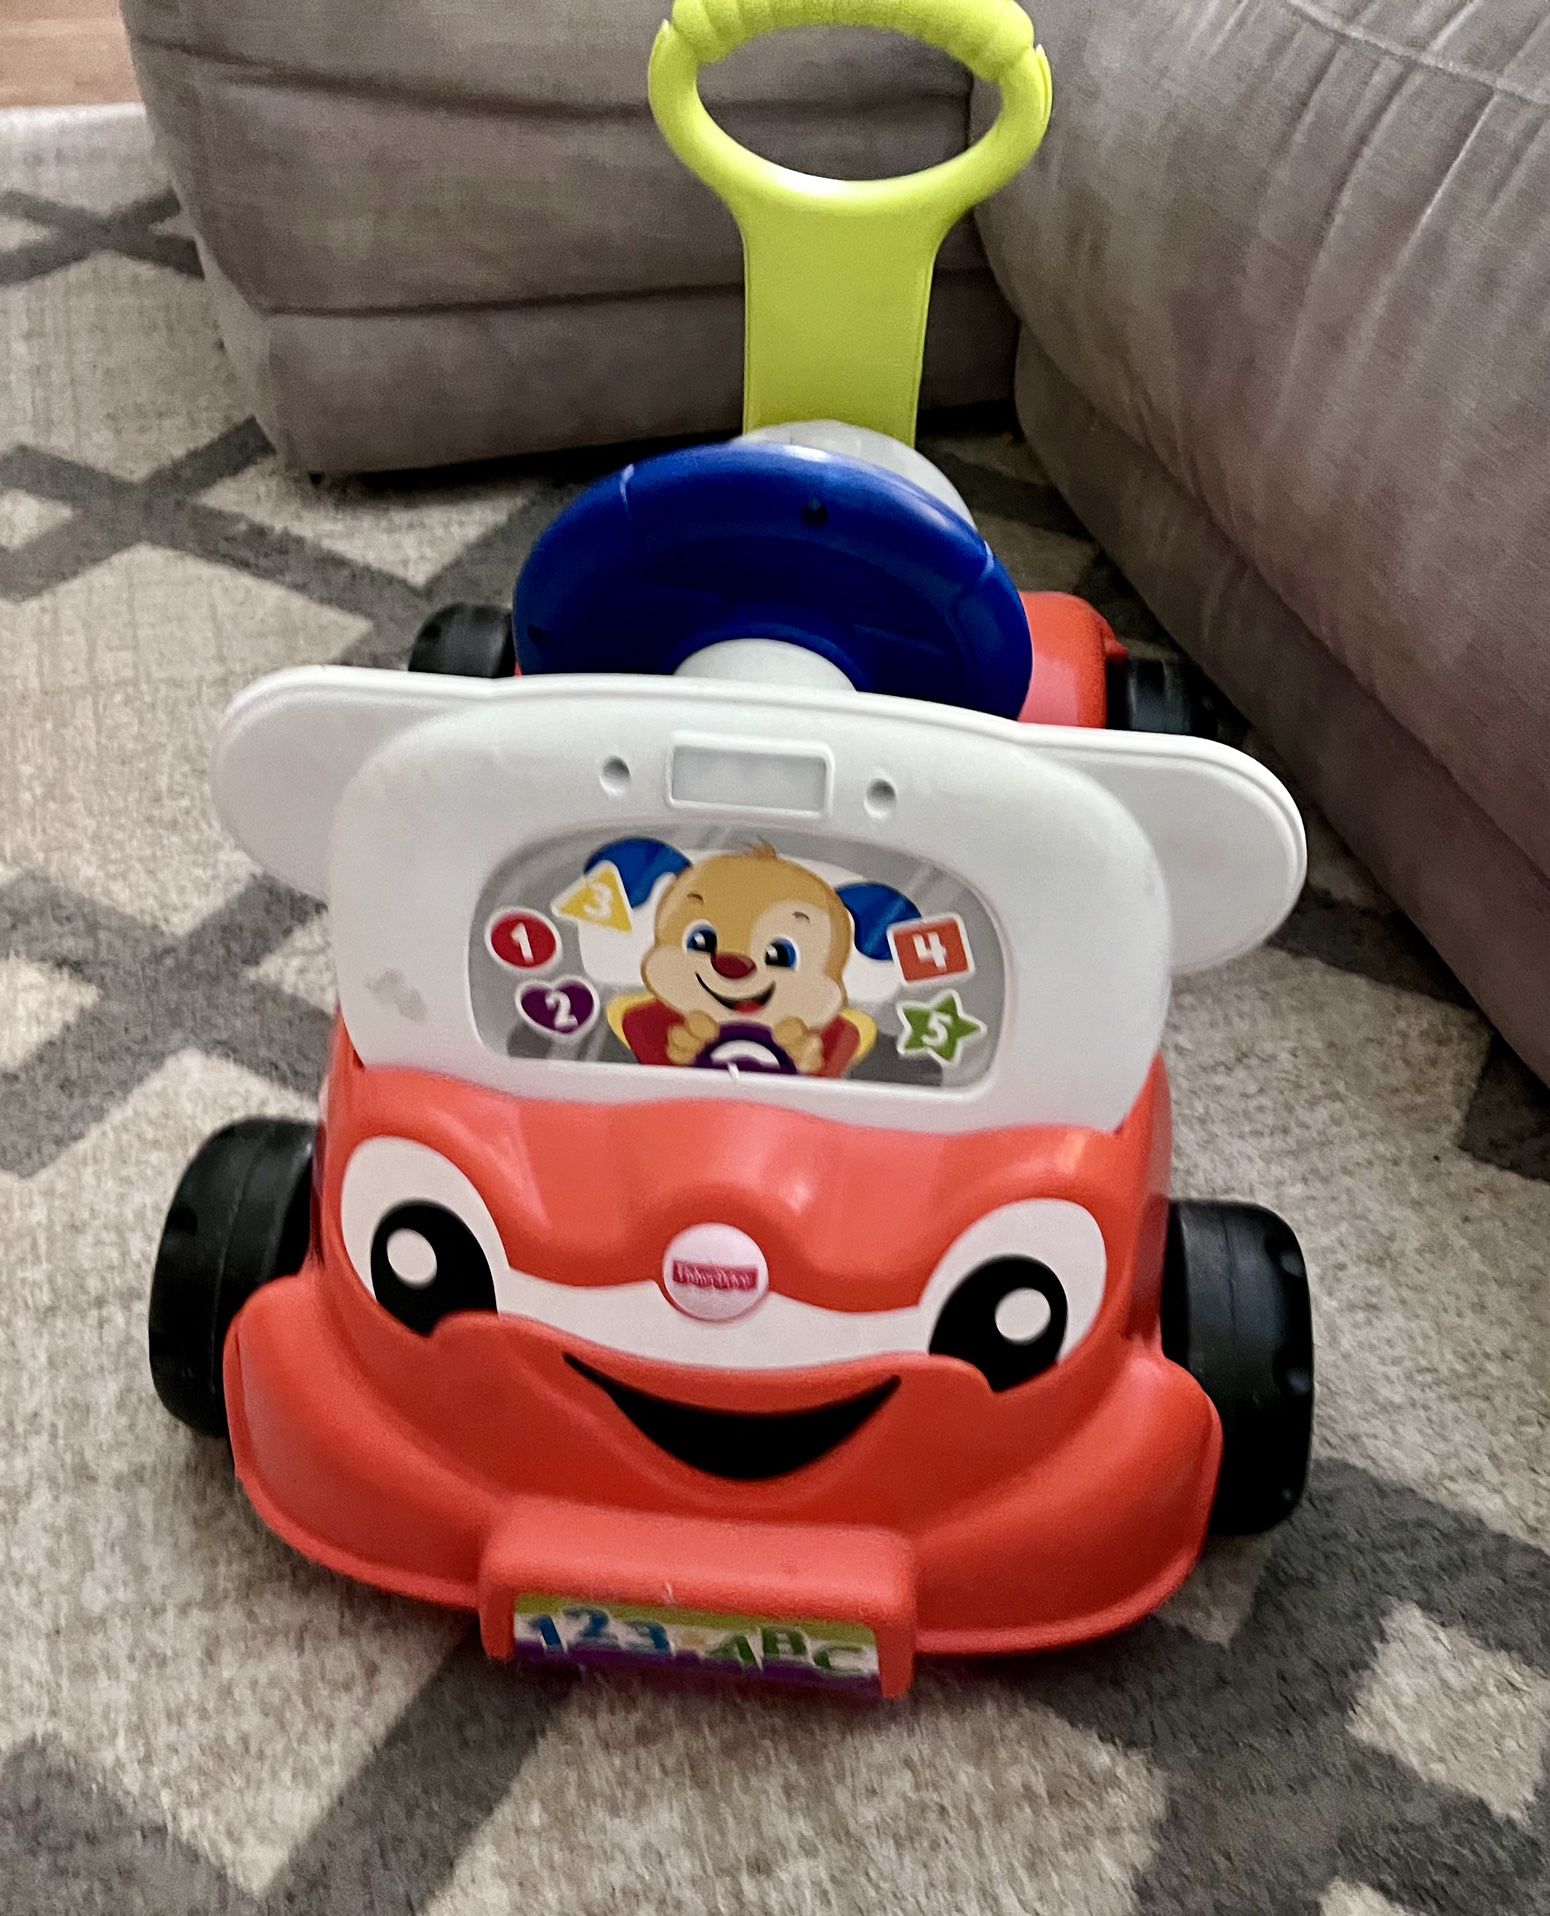 Fisher Price 3 in 1 Ride On Car